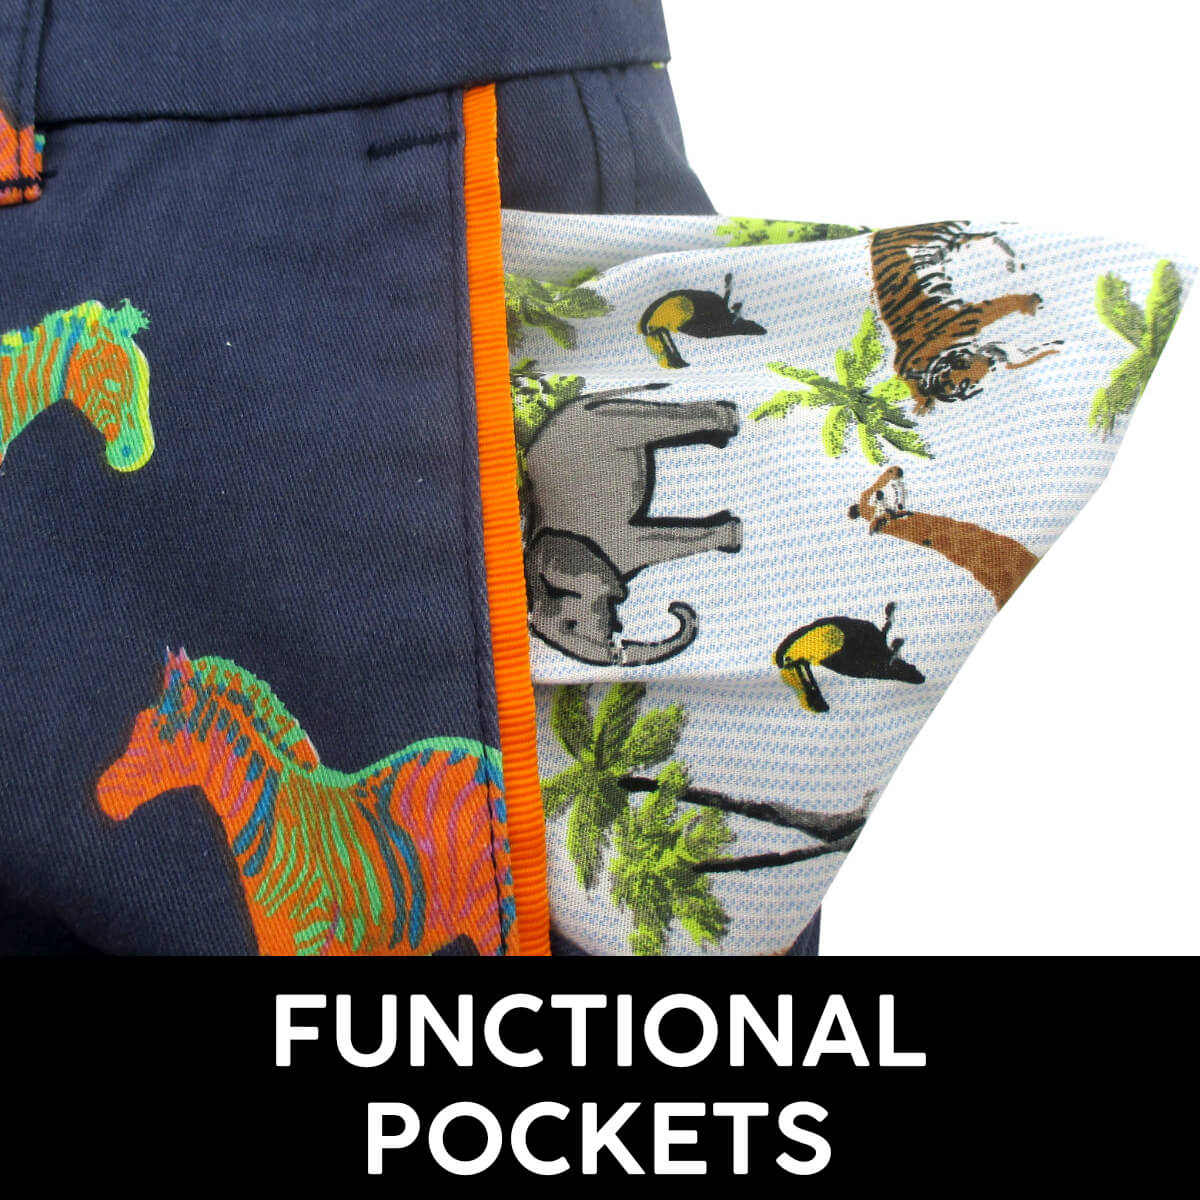 Functional Side Pockets Lined In Contrasting Prints. It's All In the Details, Shorts with Fun Detailing and Trims!